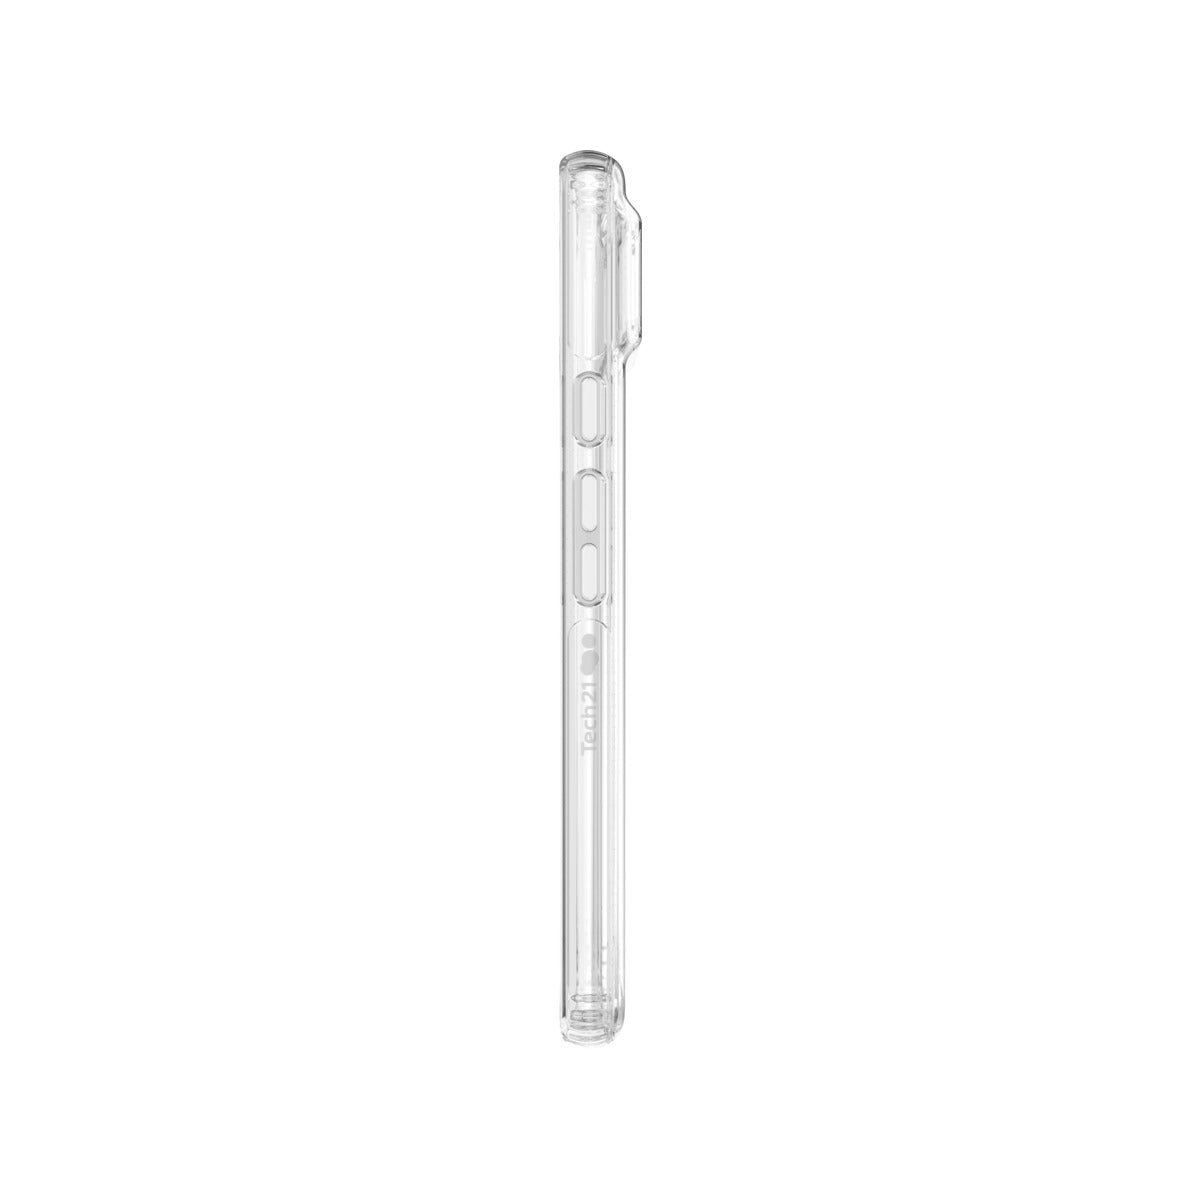 Tech21 EvoClear Phone Case for Google Pixel 6 - Clear.